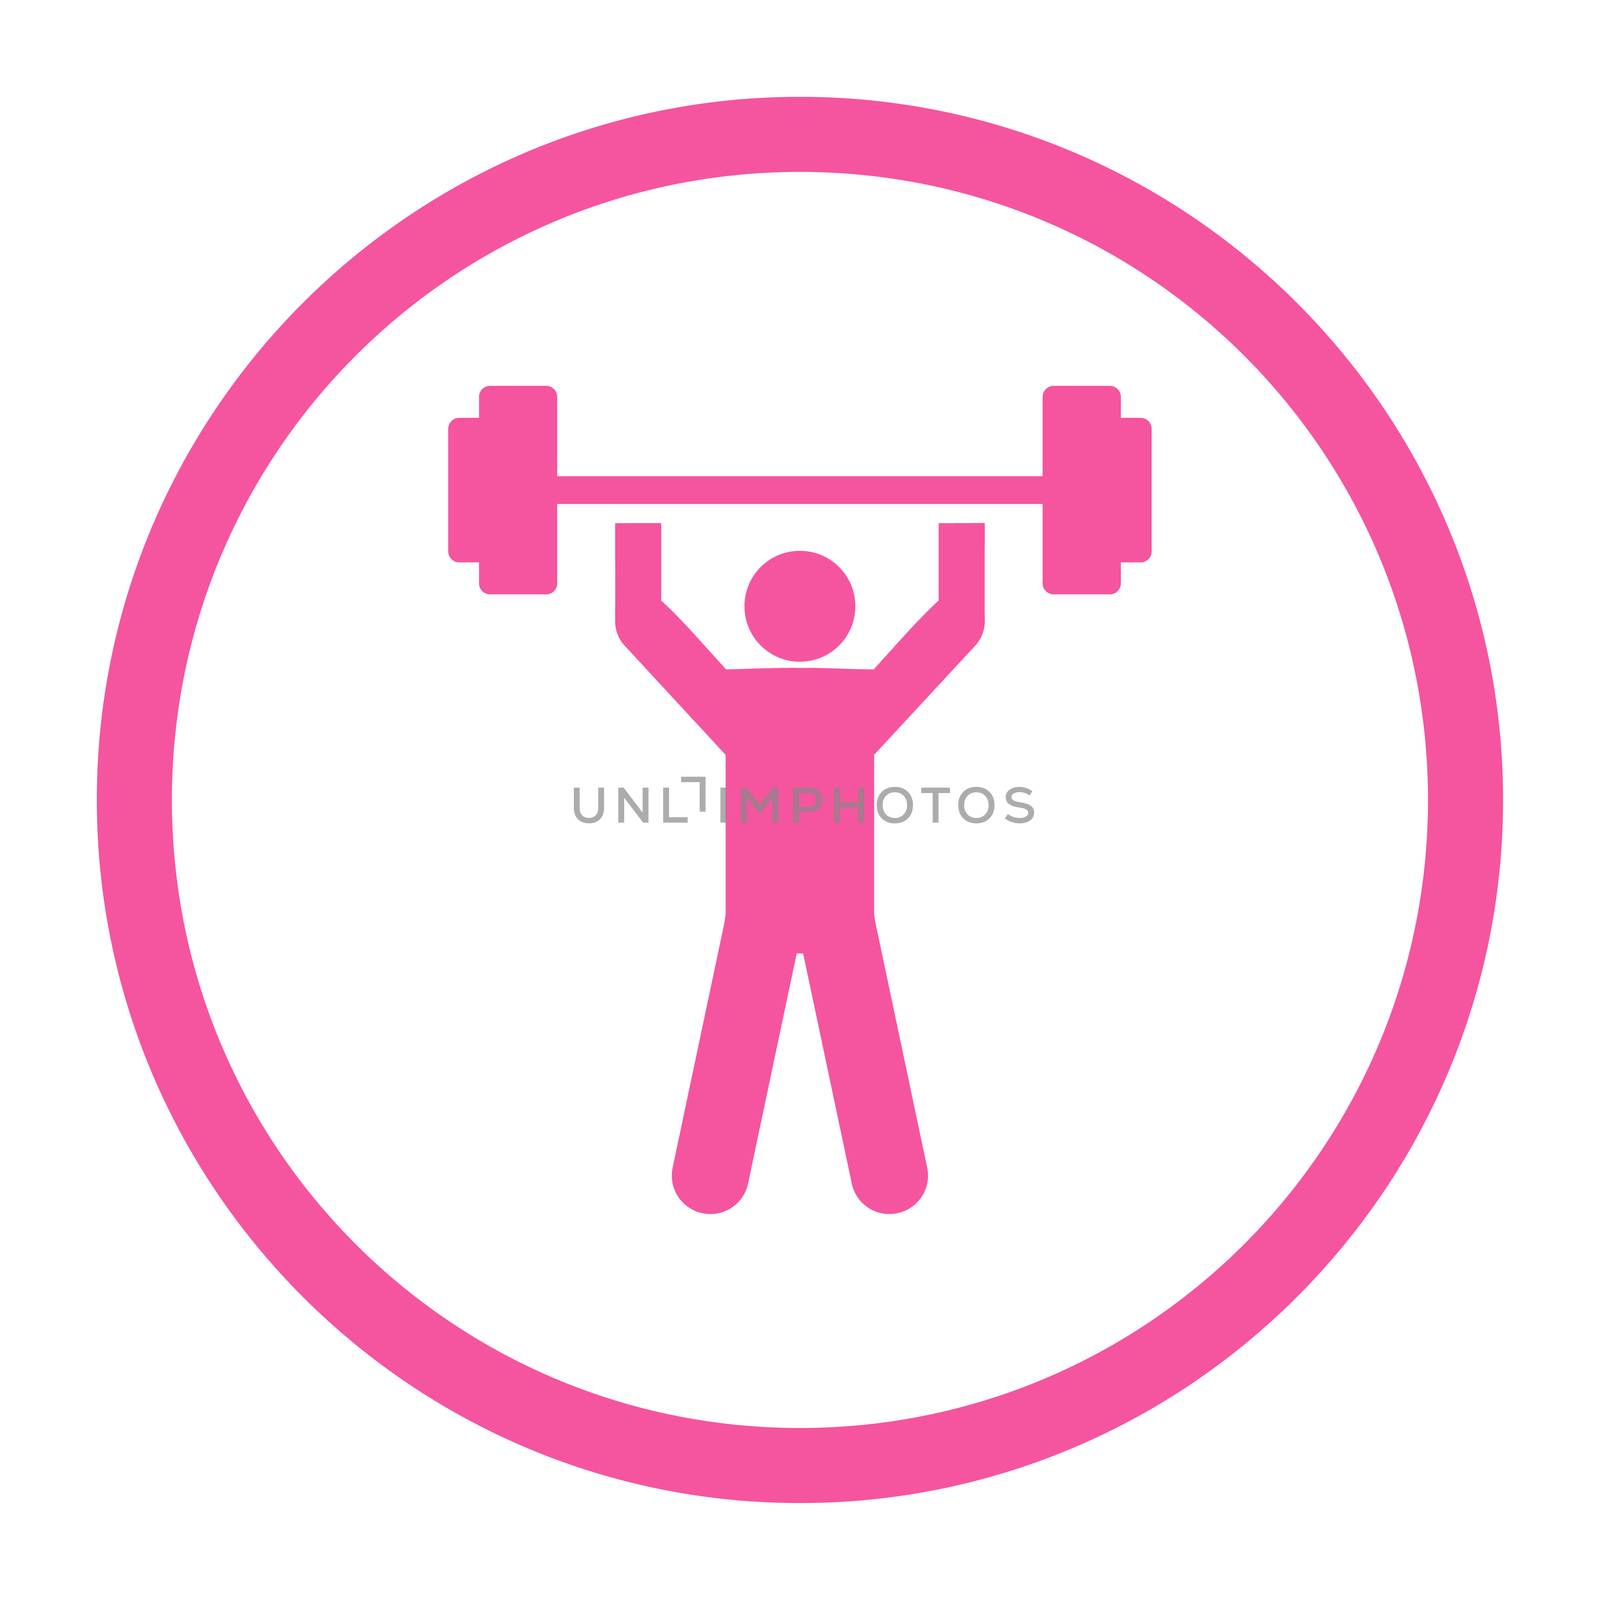 Power lifting glyph icon. This rounded flat symbol is drawn with pink color on a white background.